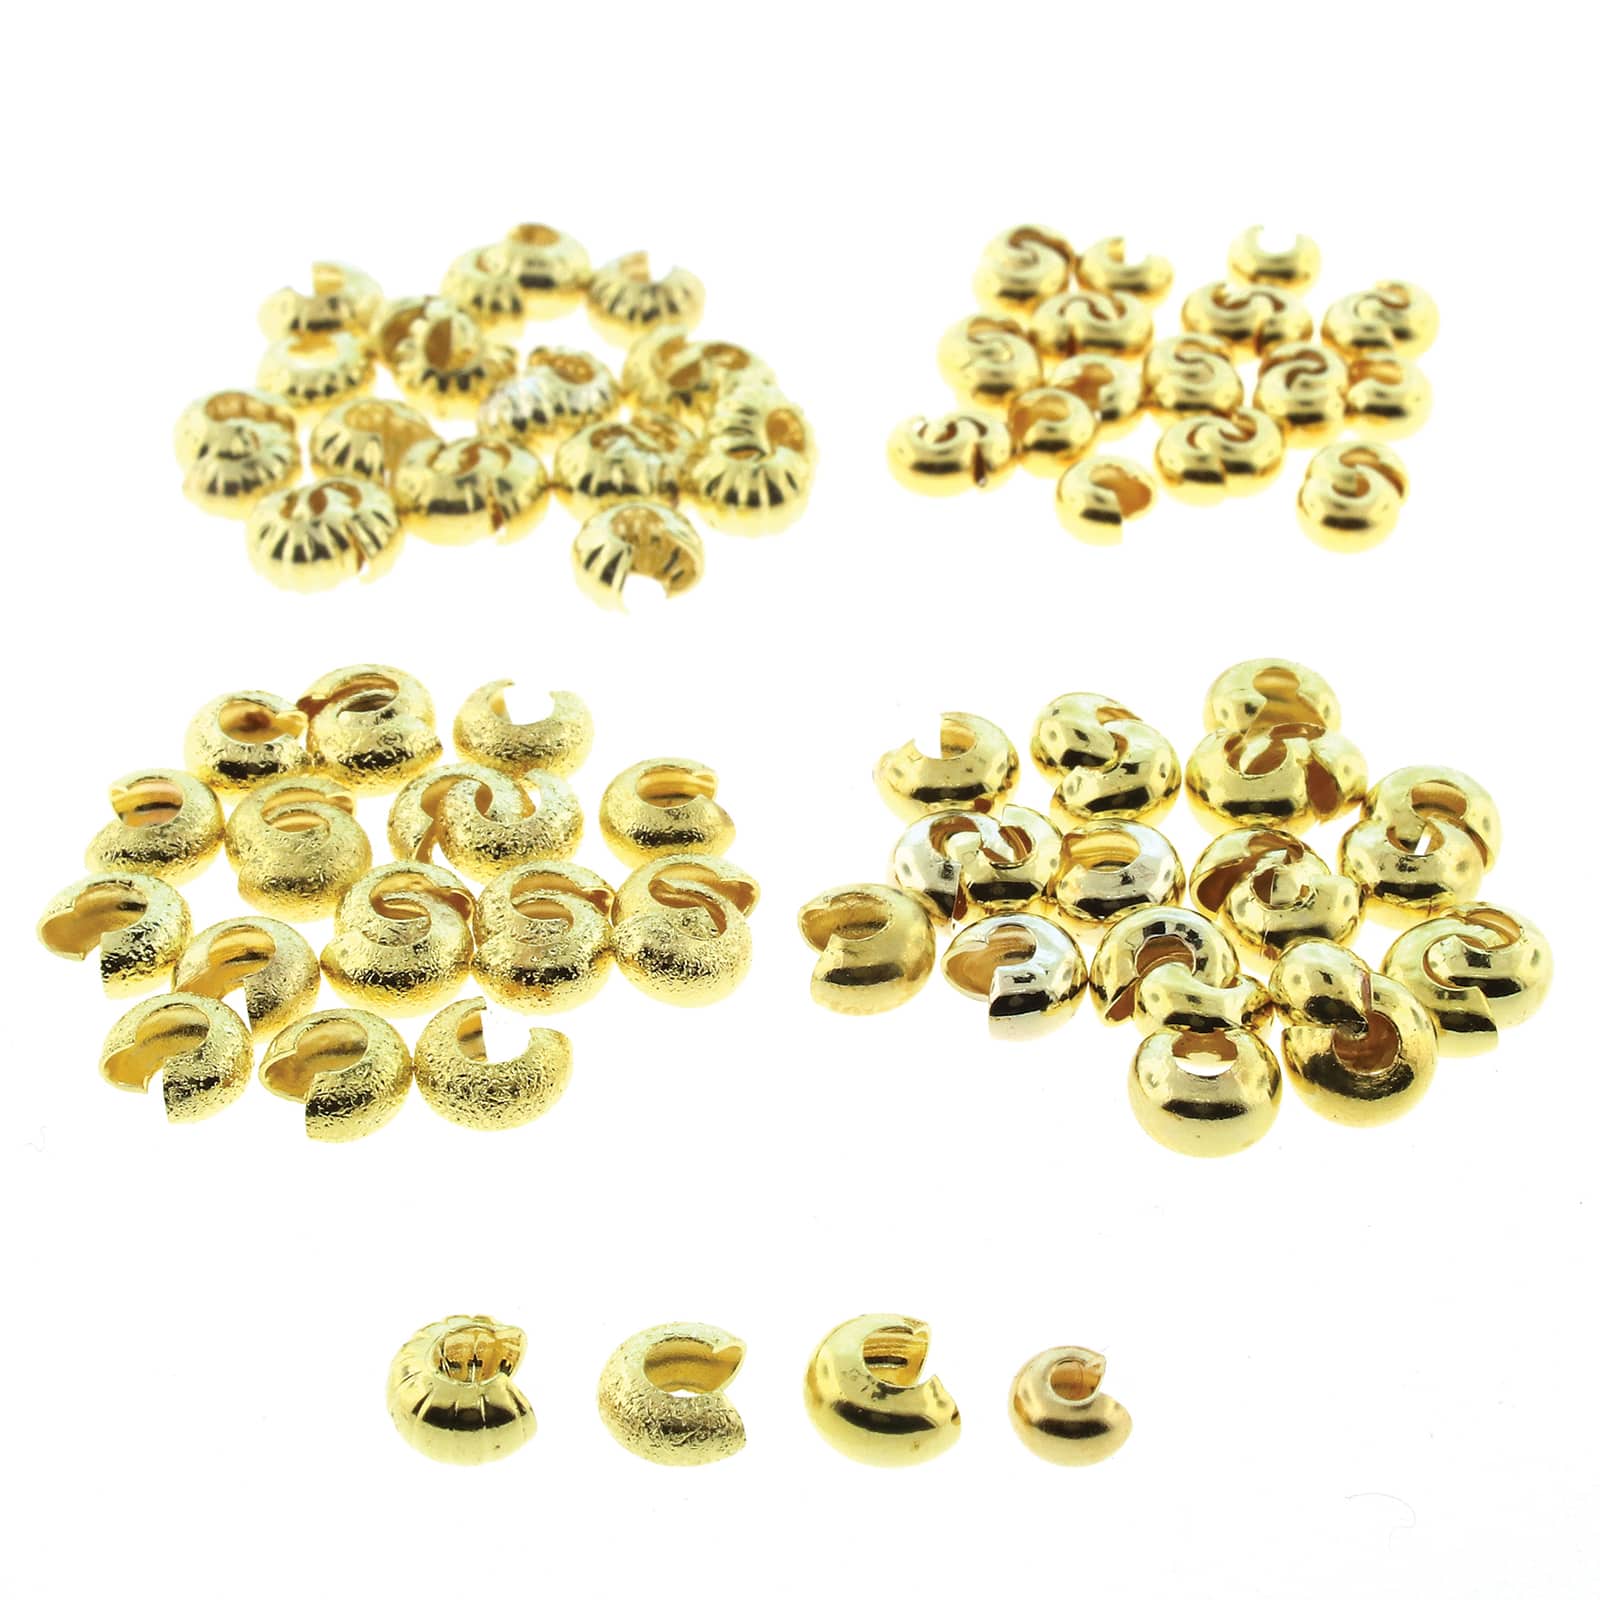 The Beadsmith&#xAE; Gold Plated Crimp Bead Cover, 80ct.